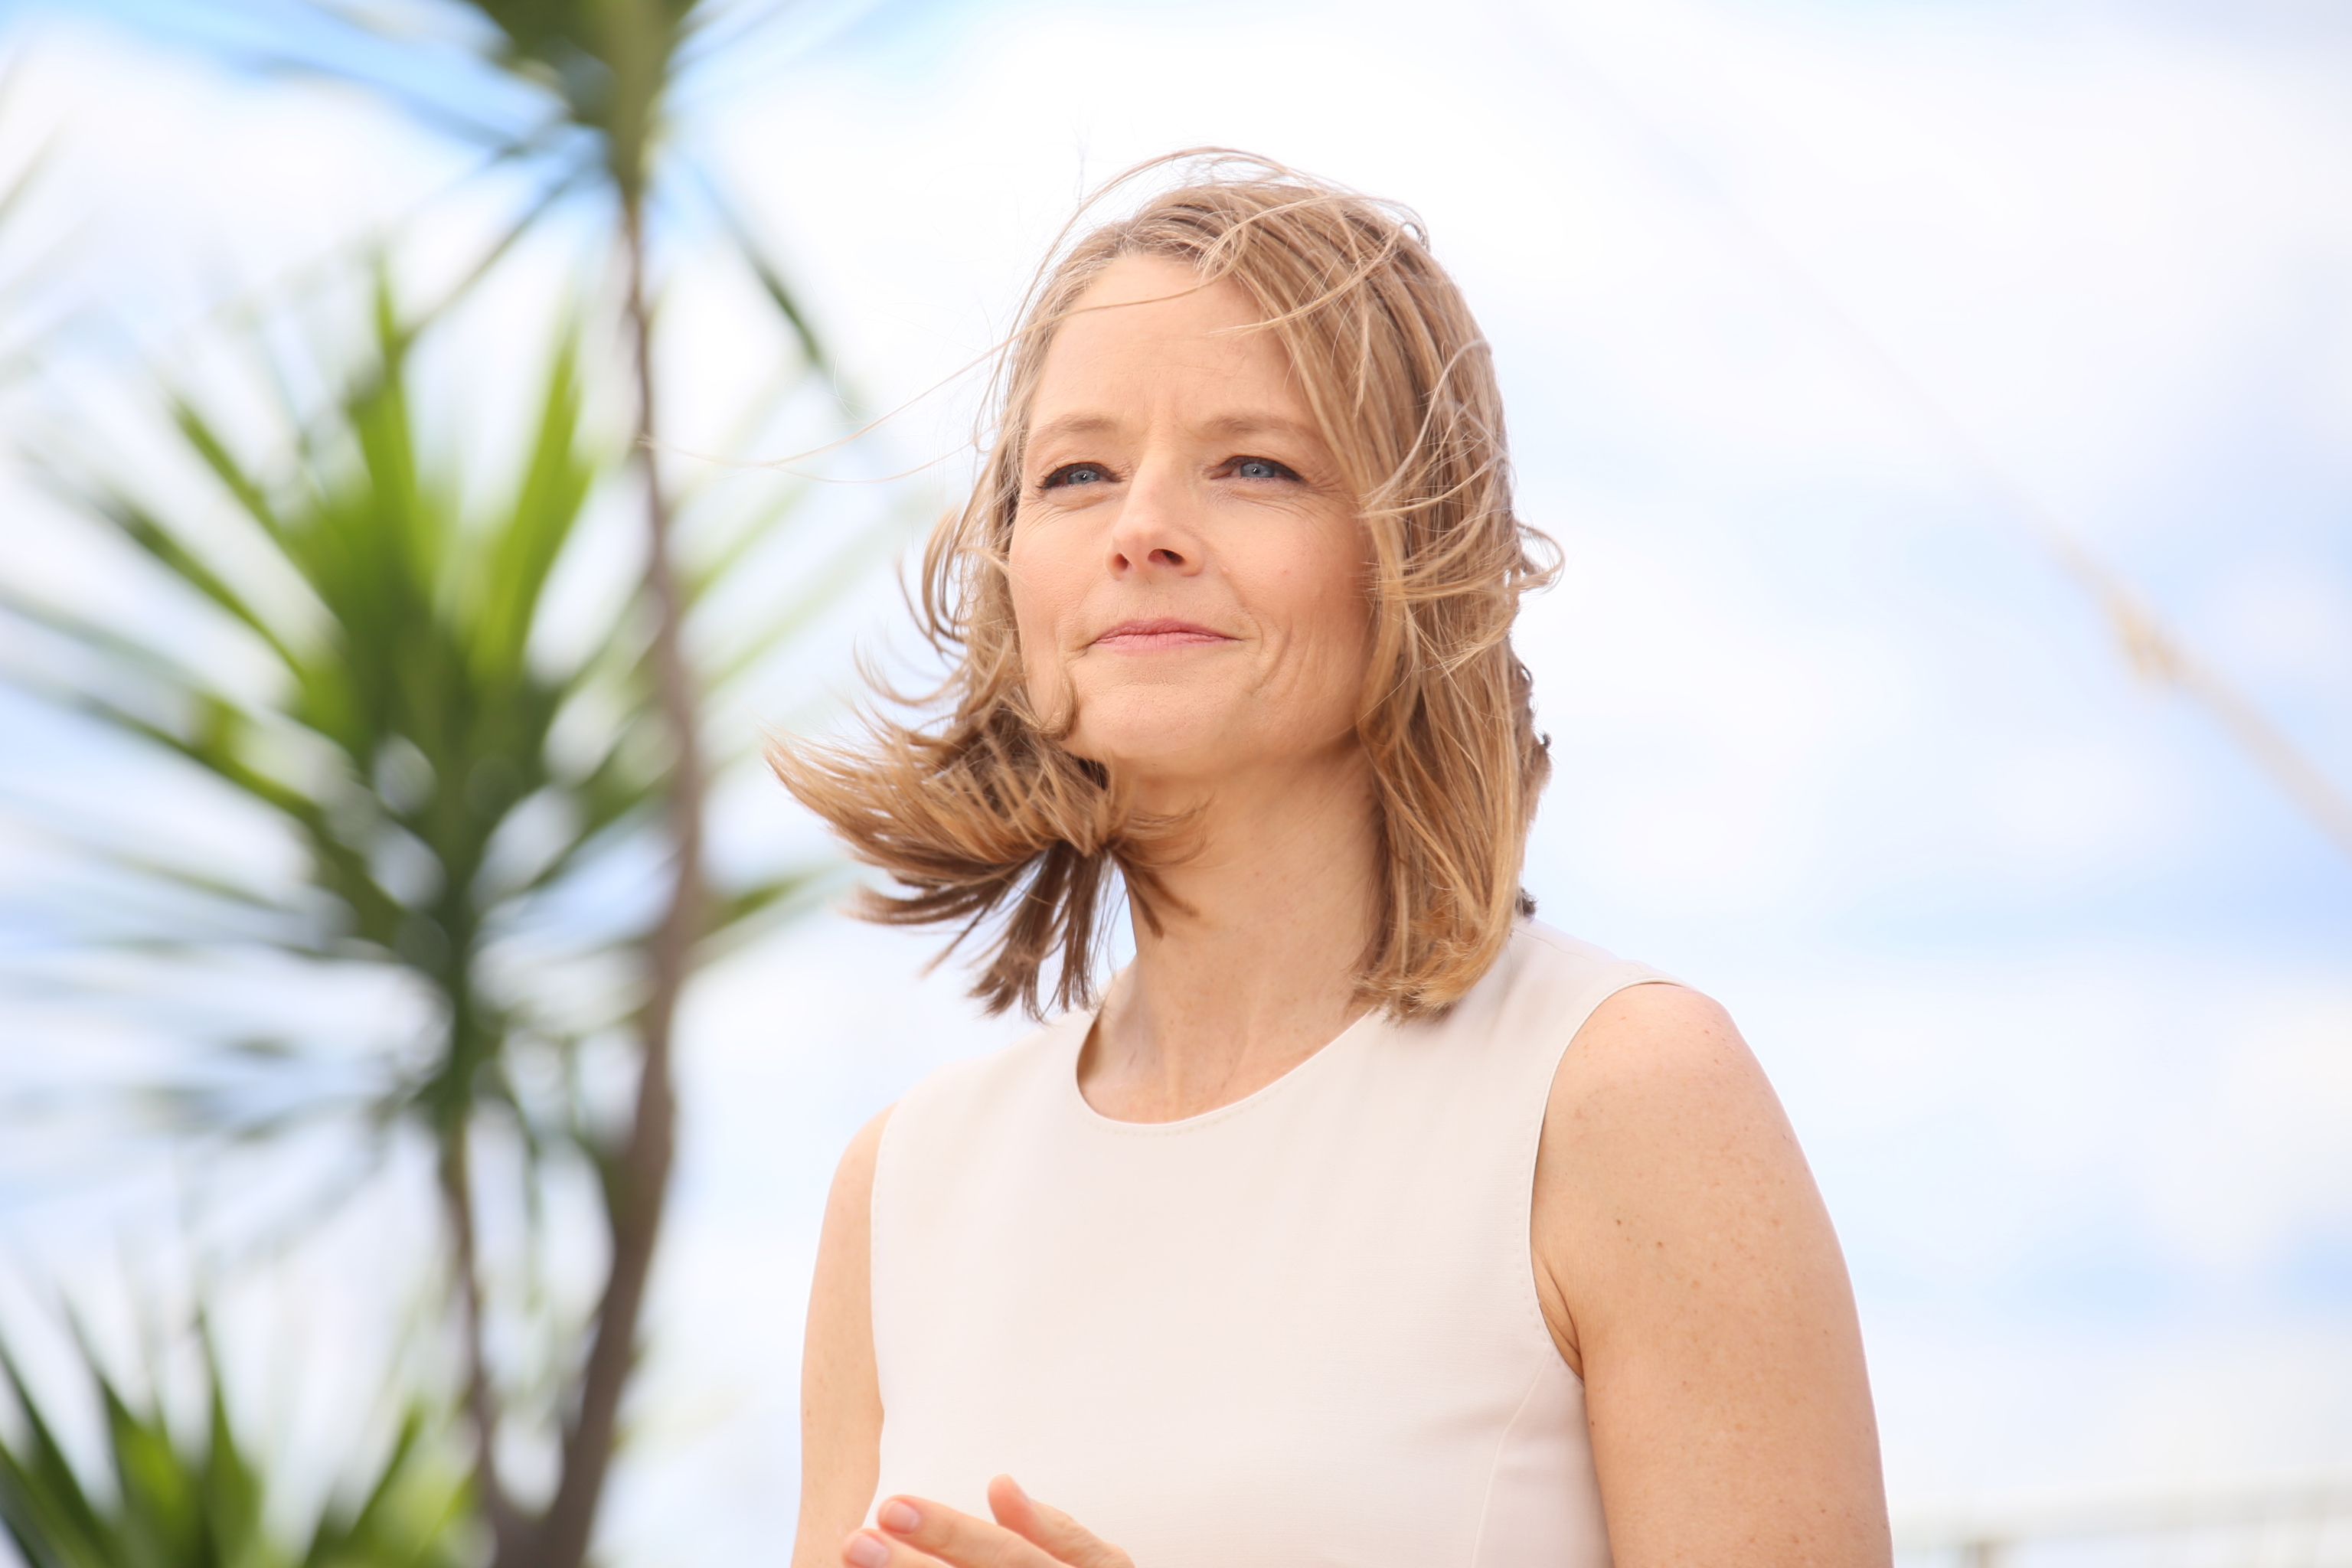 Jodie Foster at the 69th annual Cannes Film Festival in 2016.